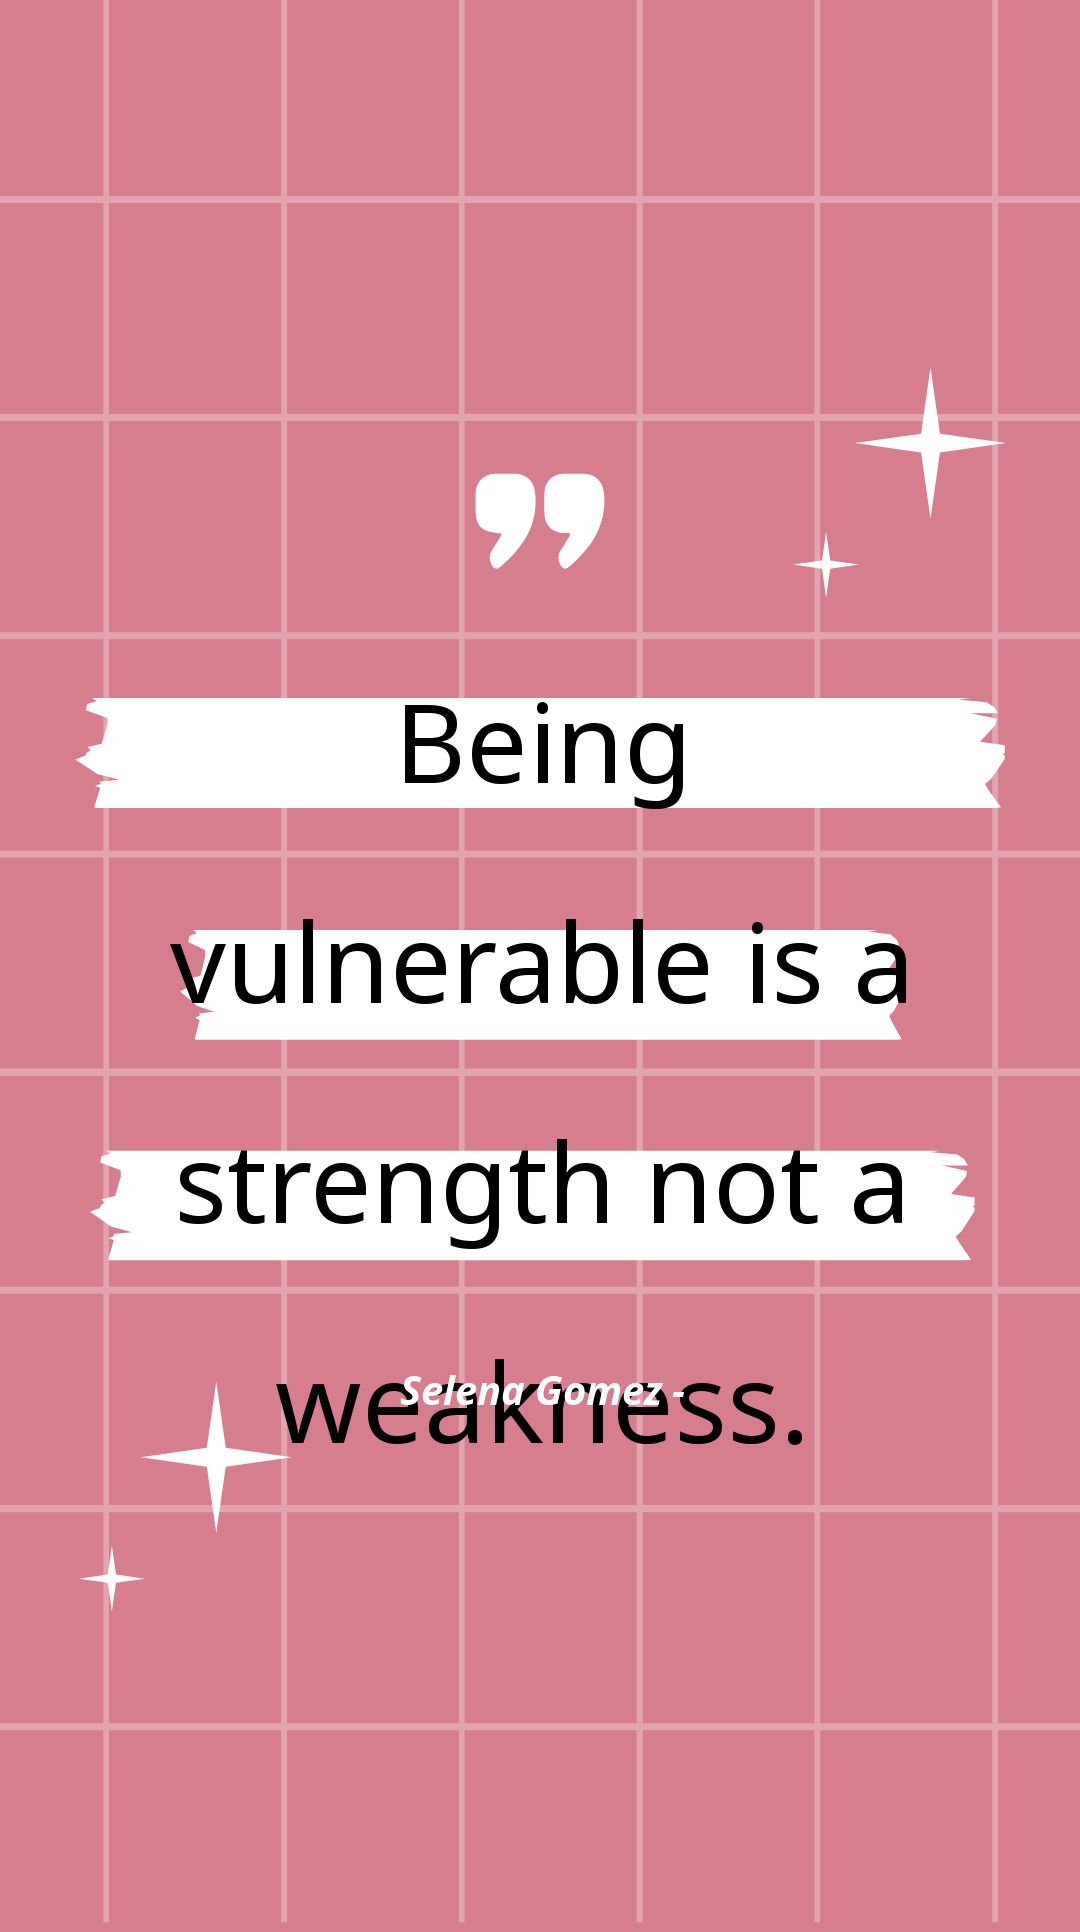 Selena Gomez - Being vulnerable is a strength not a weakness.